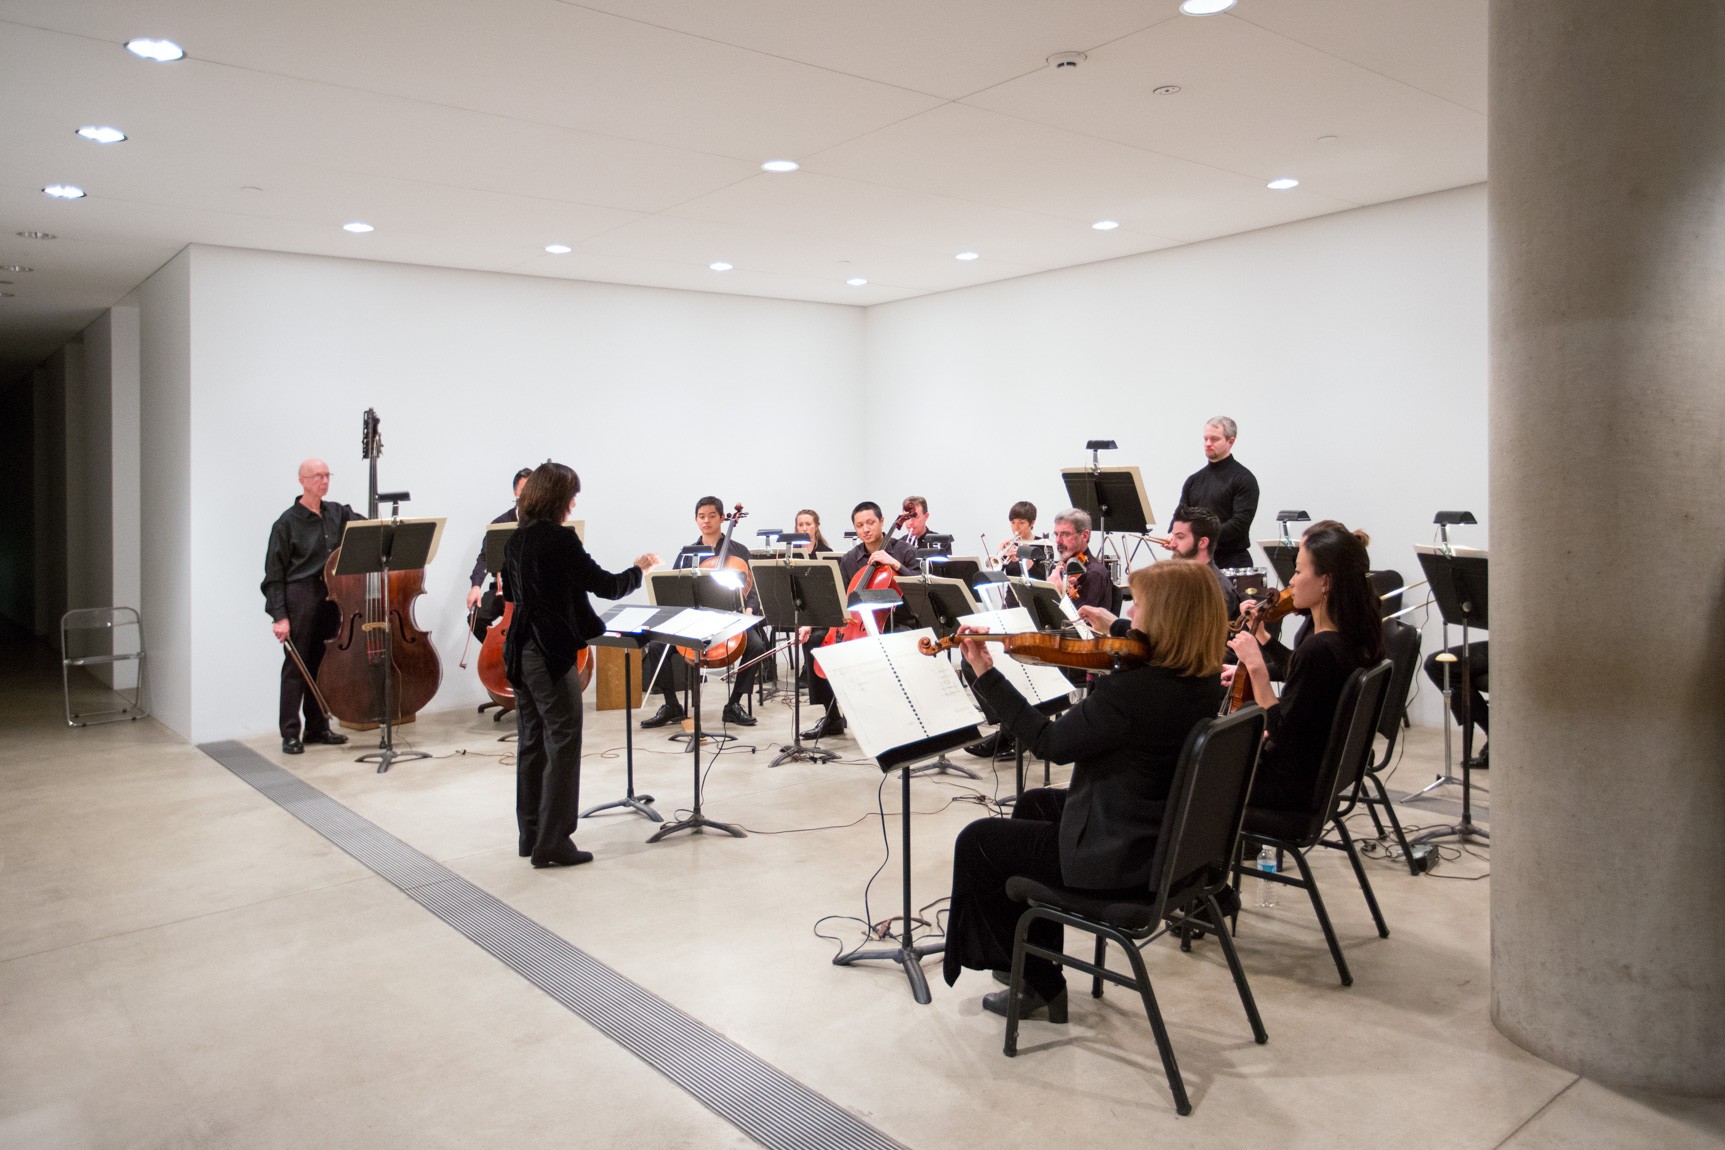 An ensemble of musicians performs in the Entrance Gallery.